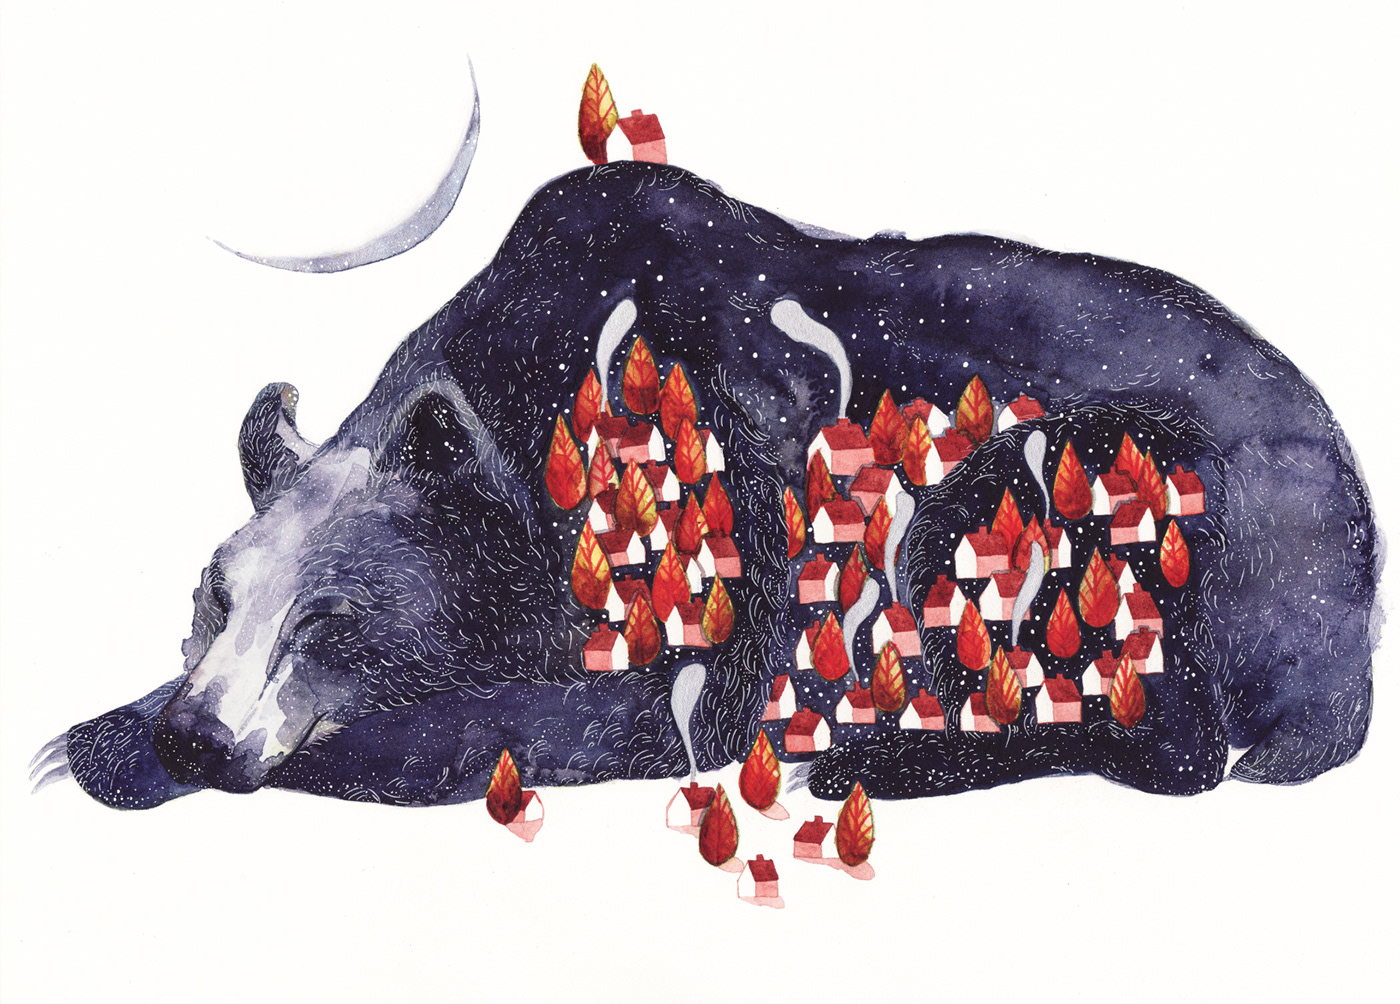 An illustration of a sleeping bear, there are autumn trees and houses on him.